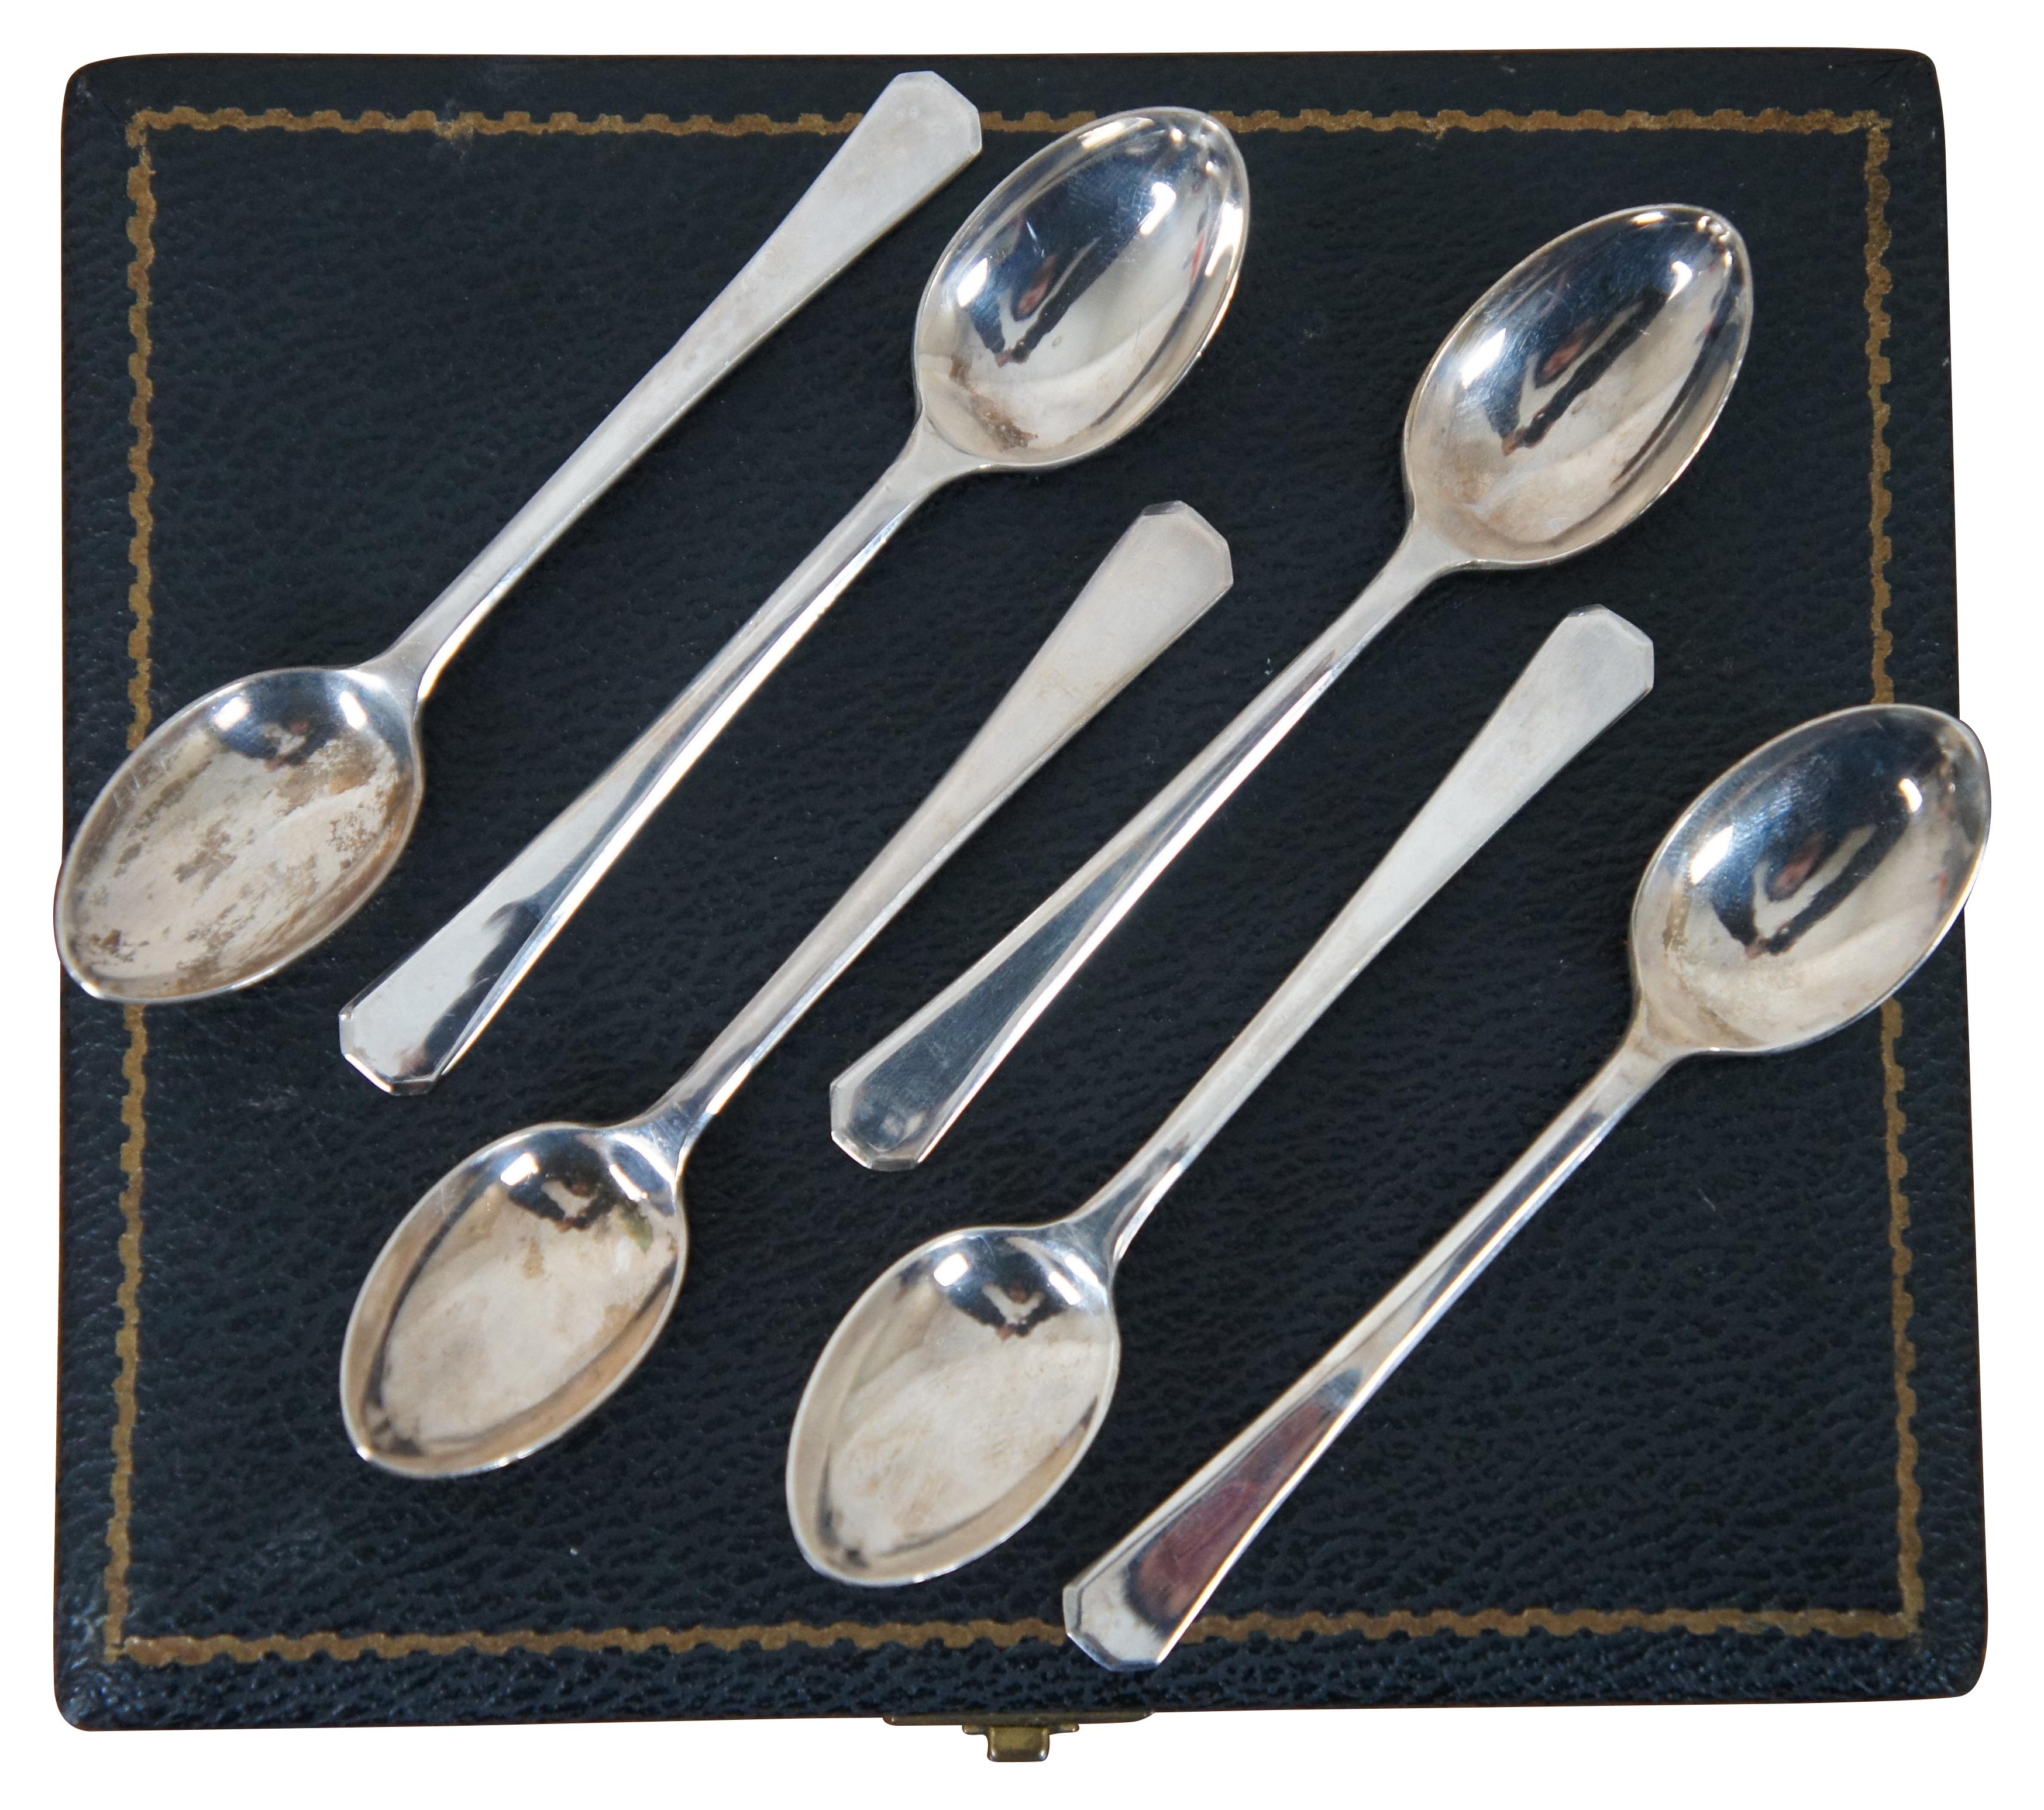 Vintage 1957-958 boxed set of six sterling silver coffee / demitasse spoons. Made in England and marked with Gothic letters HH in rectangular cartouche.

HH gothic into a rectangle is attributed to H Hayes of Birmingham England.

Measures: 3.75”